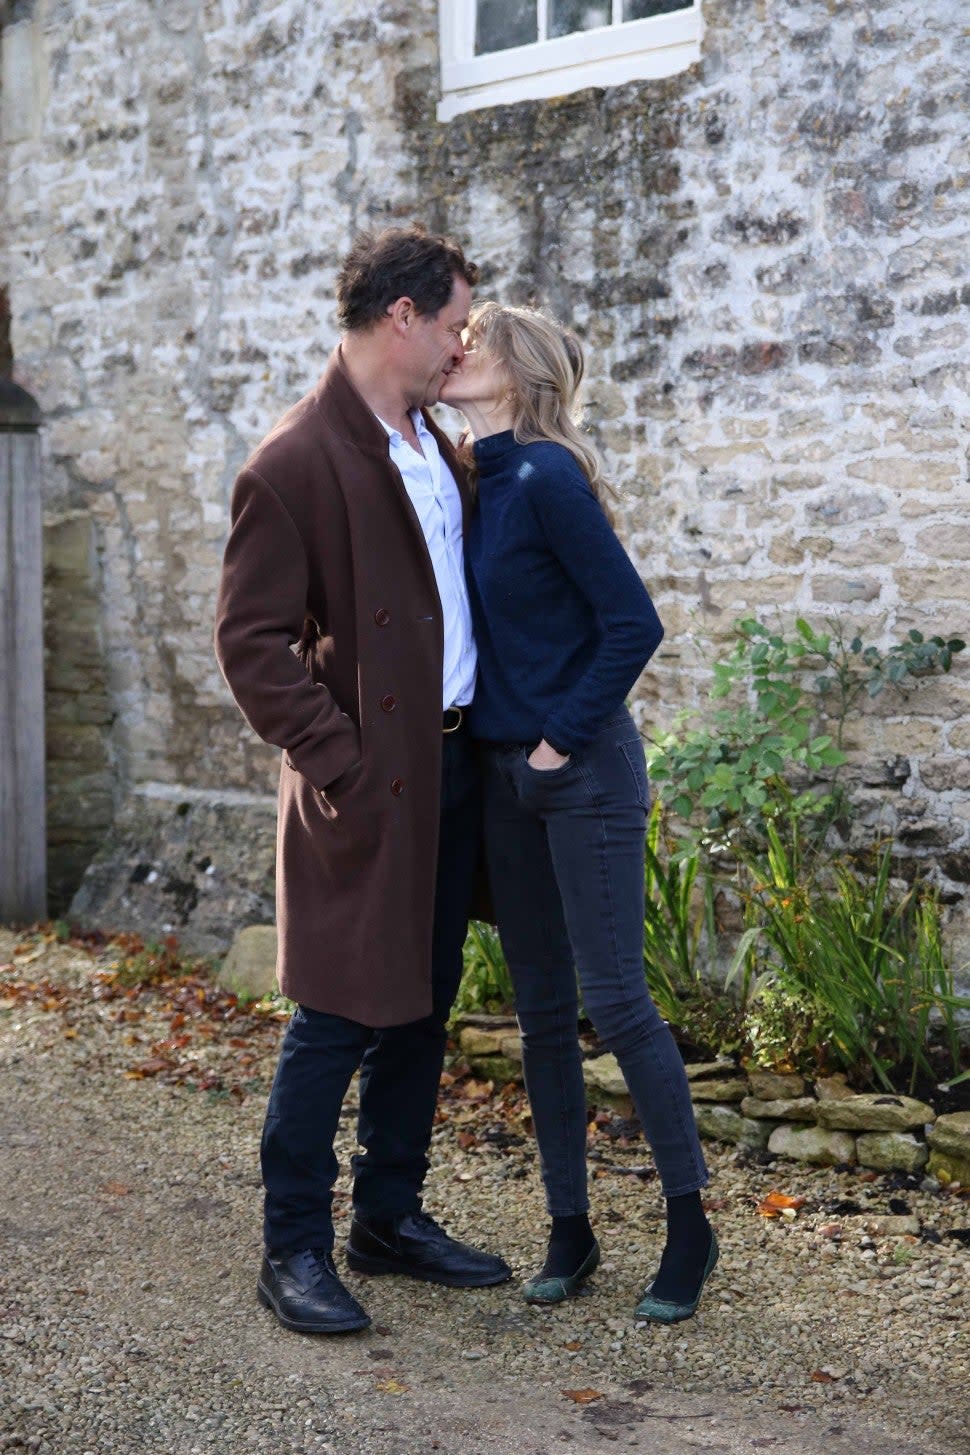 Dominic West and his wife Catherine Fitzgerald seen together at their family home after pictures emerged of the British actor kissing younger actress Lily James in Rome. The pair said they are staying together in a handwritten note that stated: 